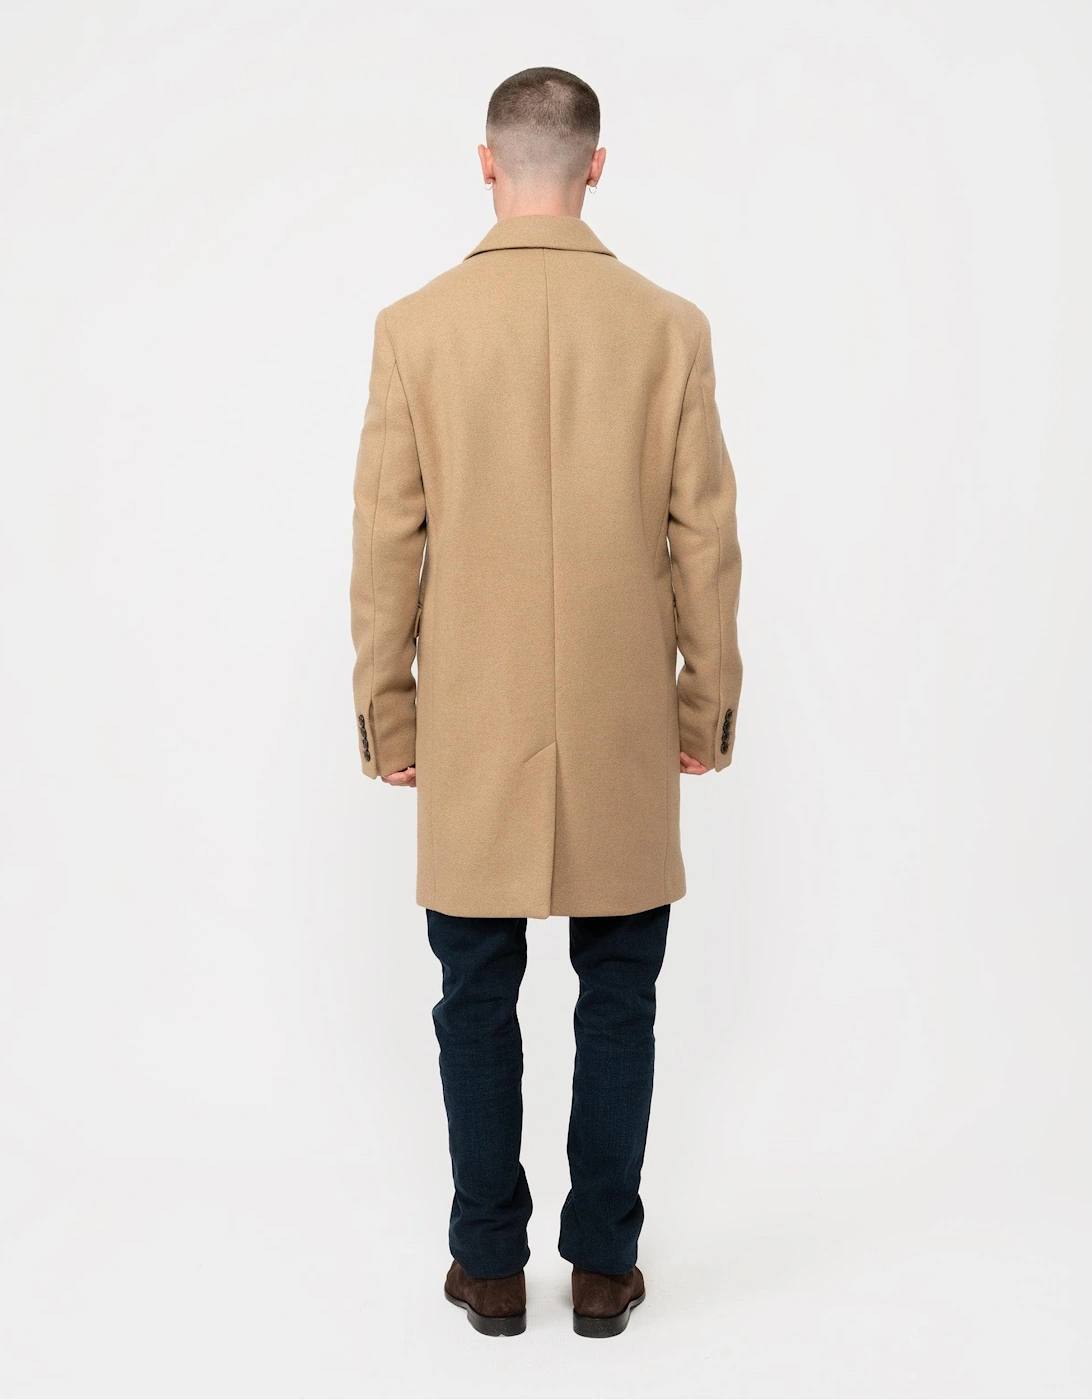 Mens Classic Tailored Fit Wool Topcoat